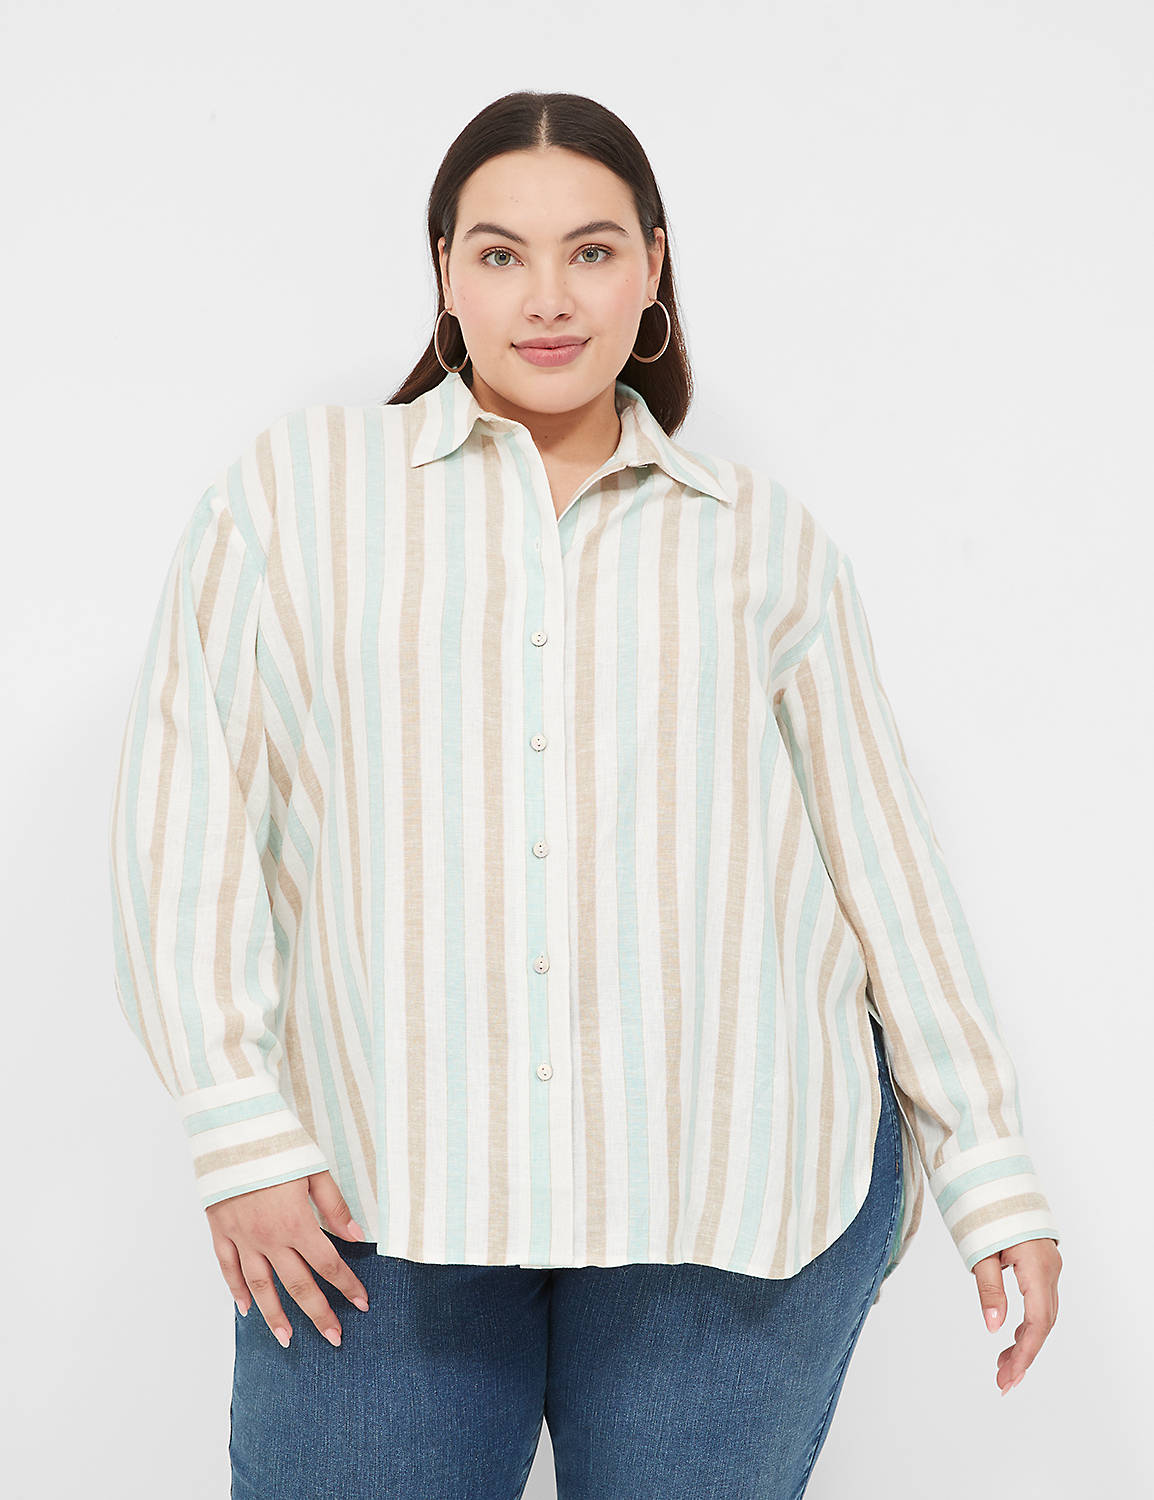 Relaxed Long Sleeve Button Down 113 Product Image 1